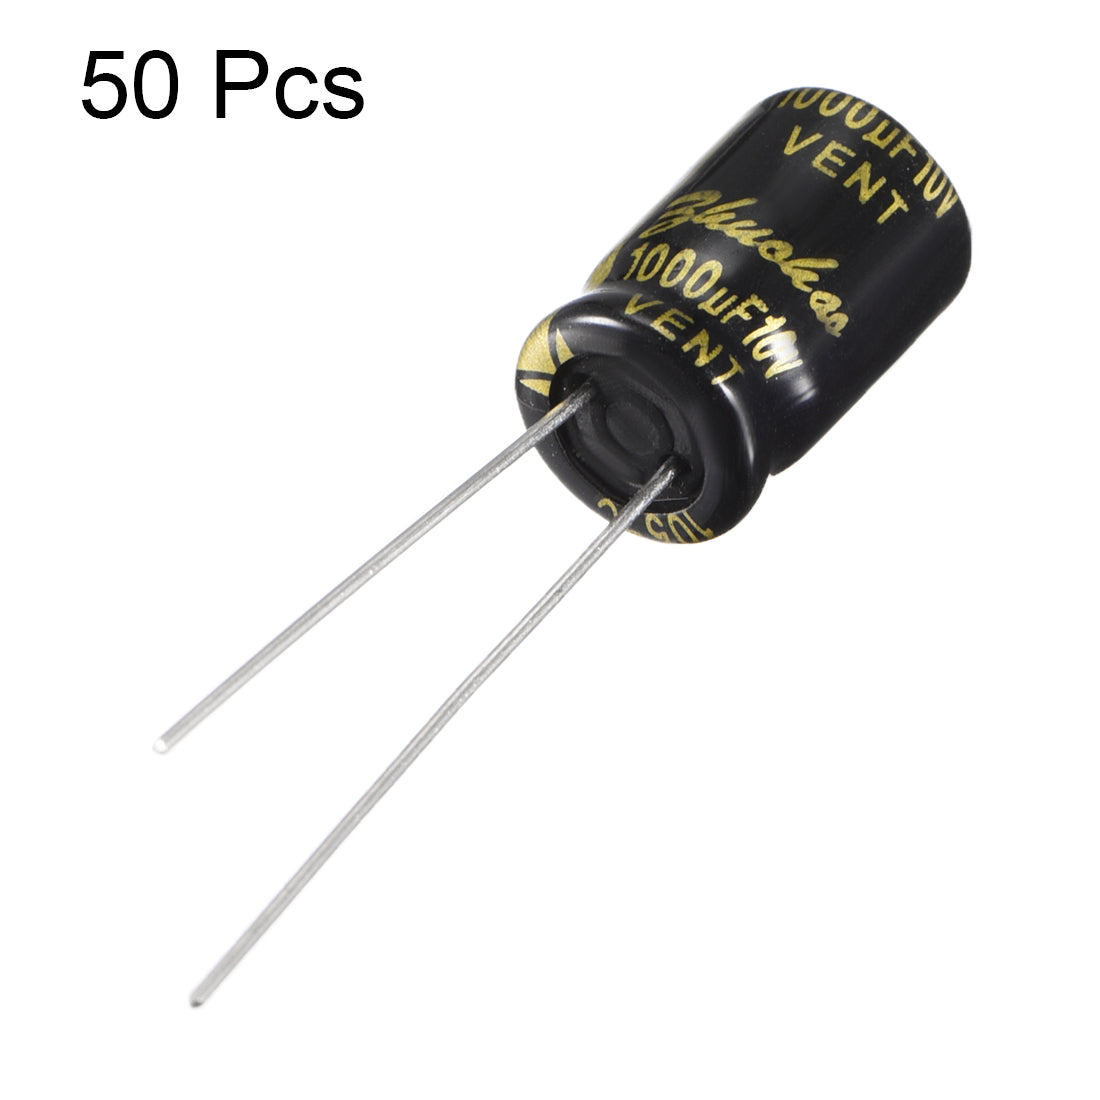 uxcell Uxcell Aluminum Radial Electrolytic Capacitor with 1000uF 10V 105 Celsius Life 2000H 8 x 12 mm Black 50pcs